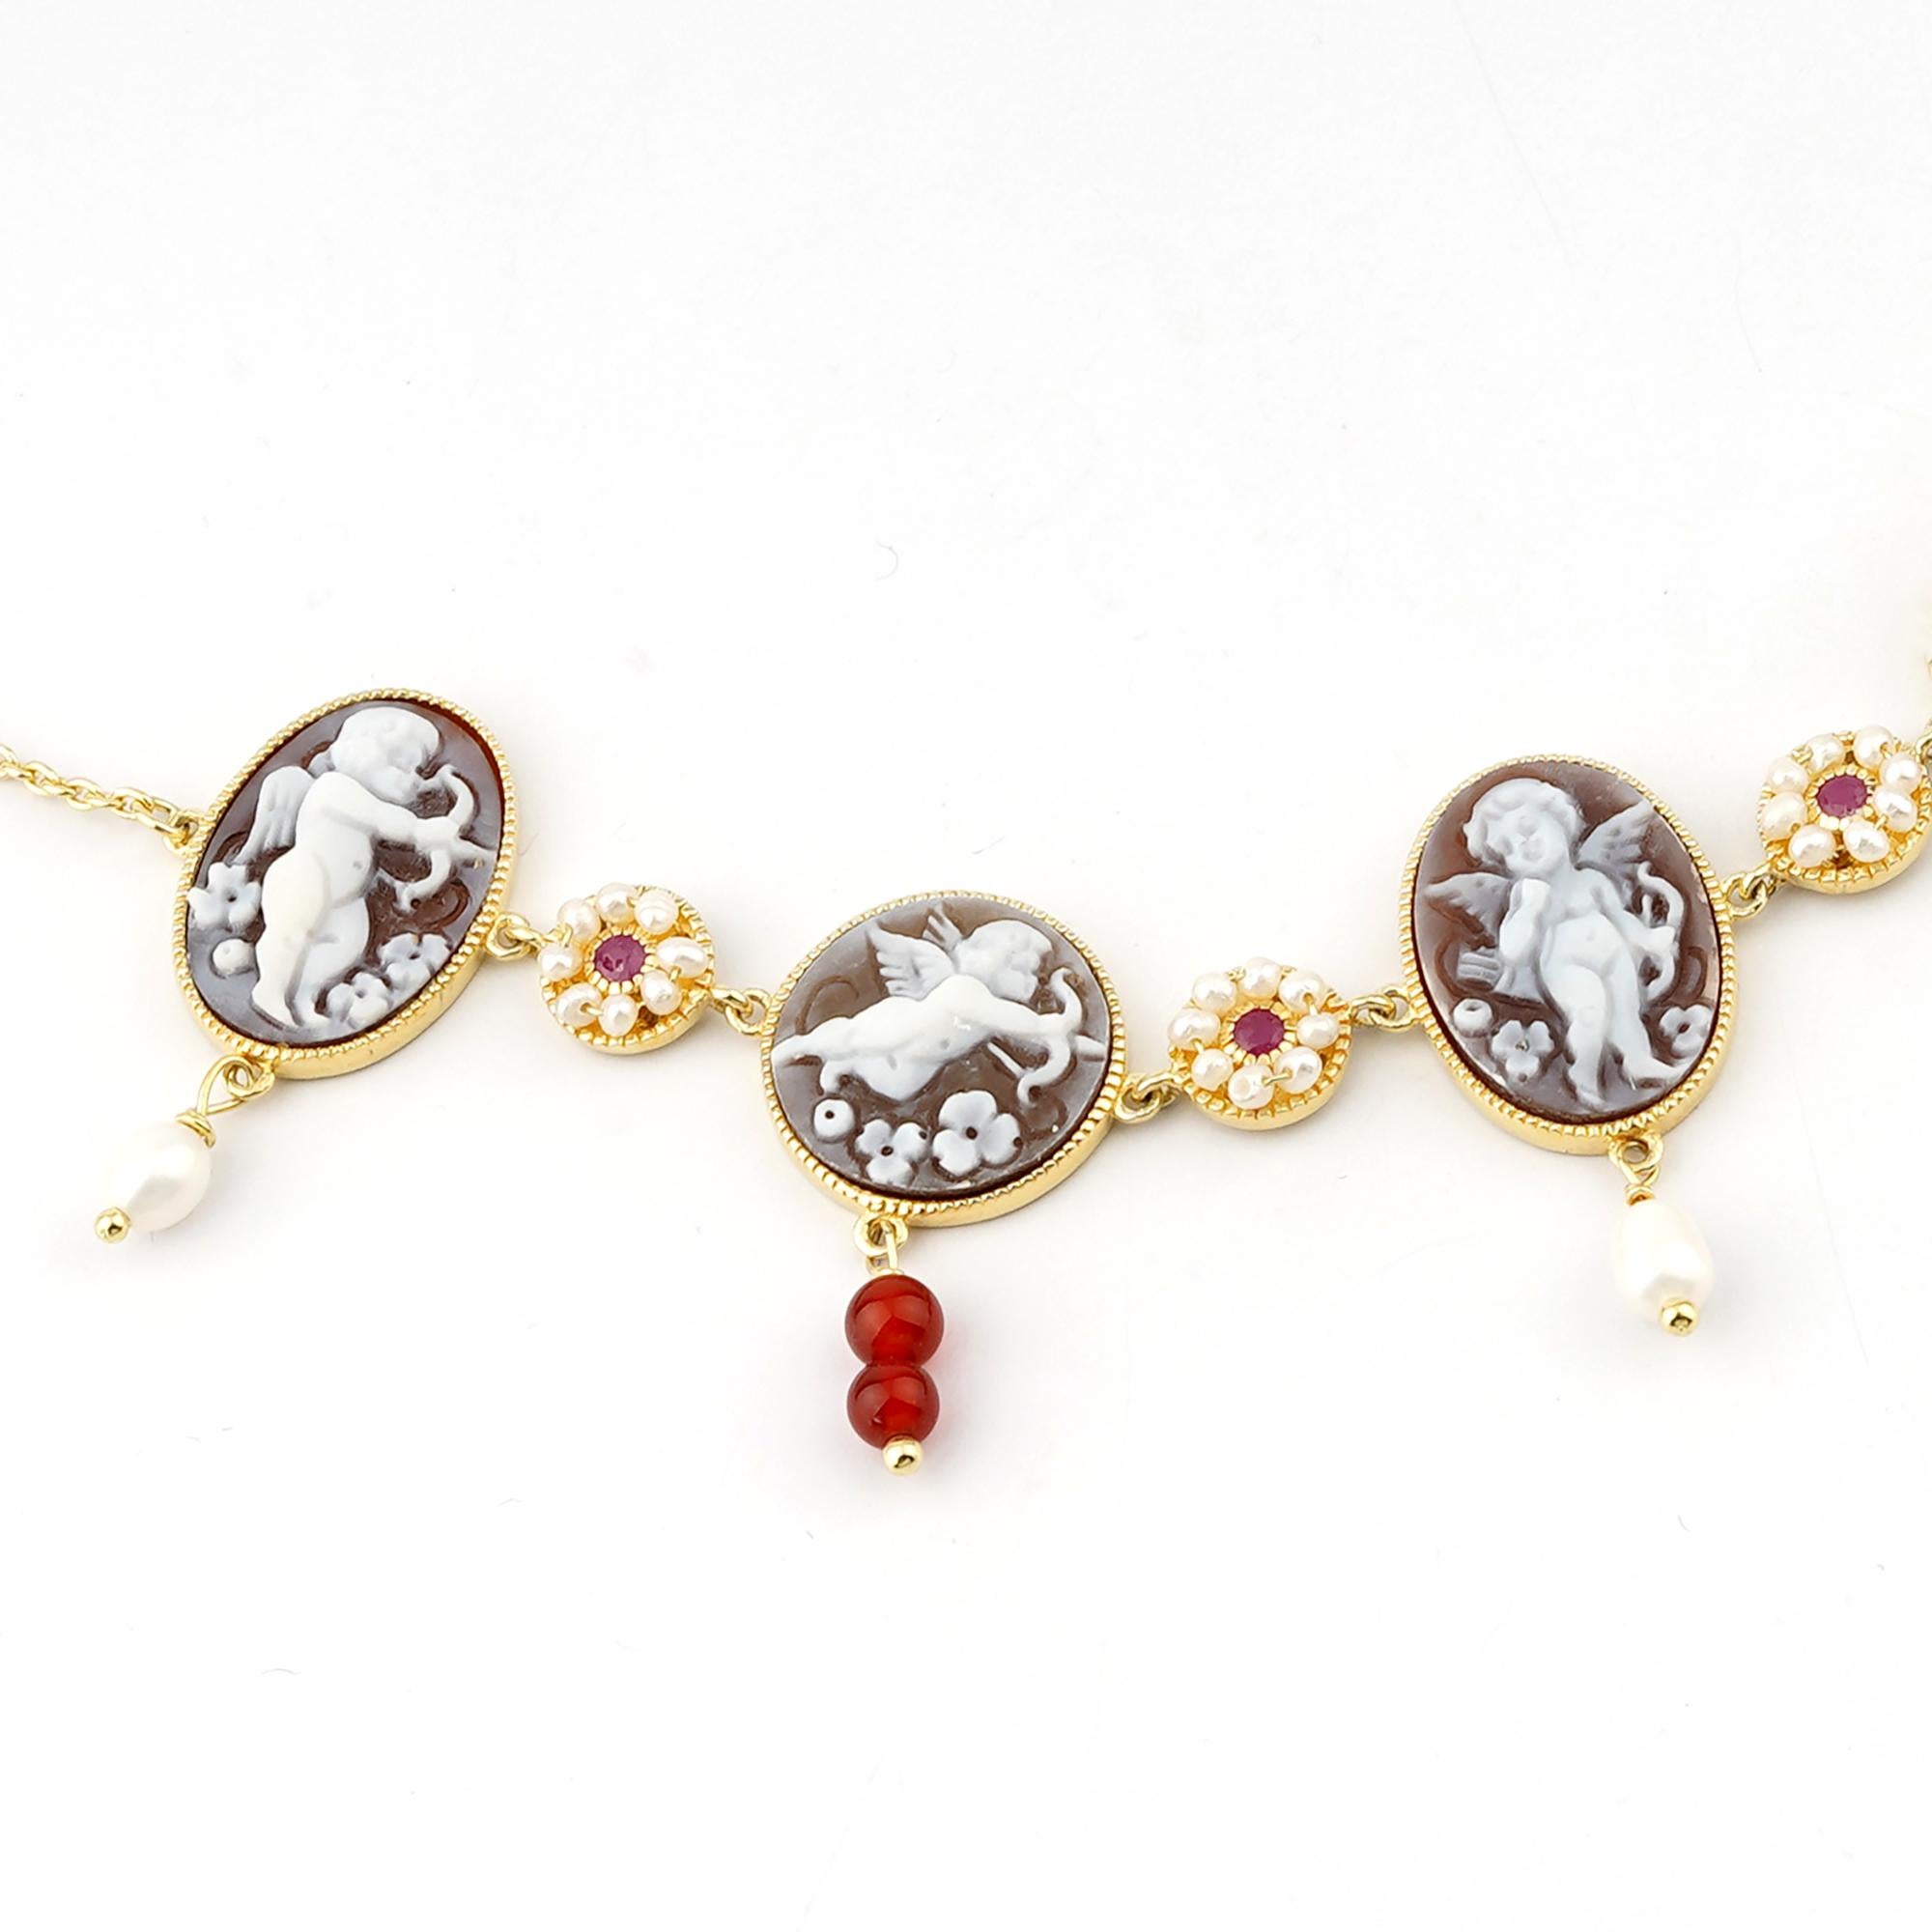 18 carat Gold Plated 925 Sterling Silver with 20mm and 16mm Sea Shell Cameos Bracelet. Fully handcarved Cupids on a sea shell cameo set in a 18kt Gold plated silver Bracelet with red rubies and freshwater pearls. Carvings are performed by our master